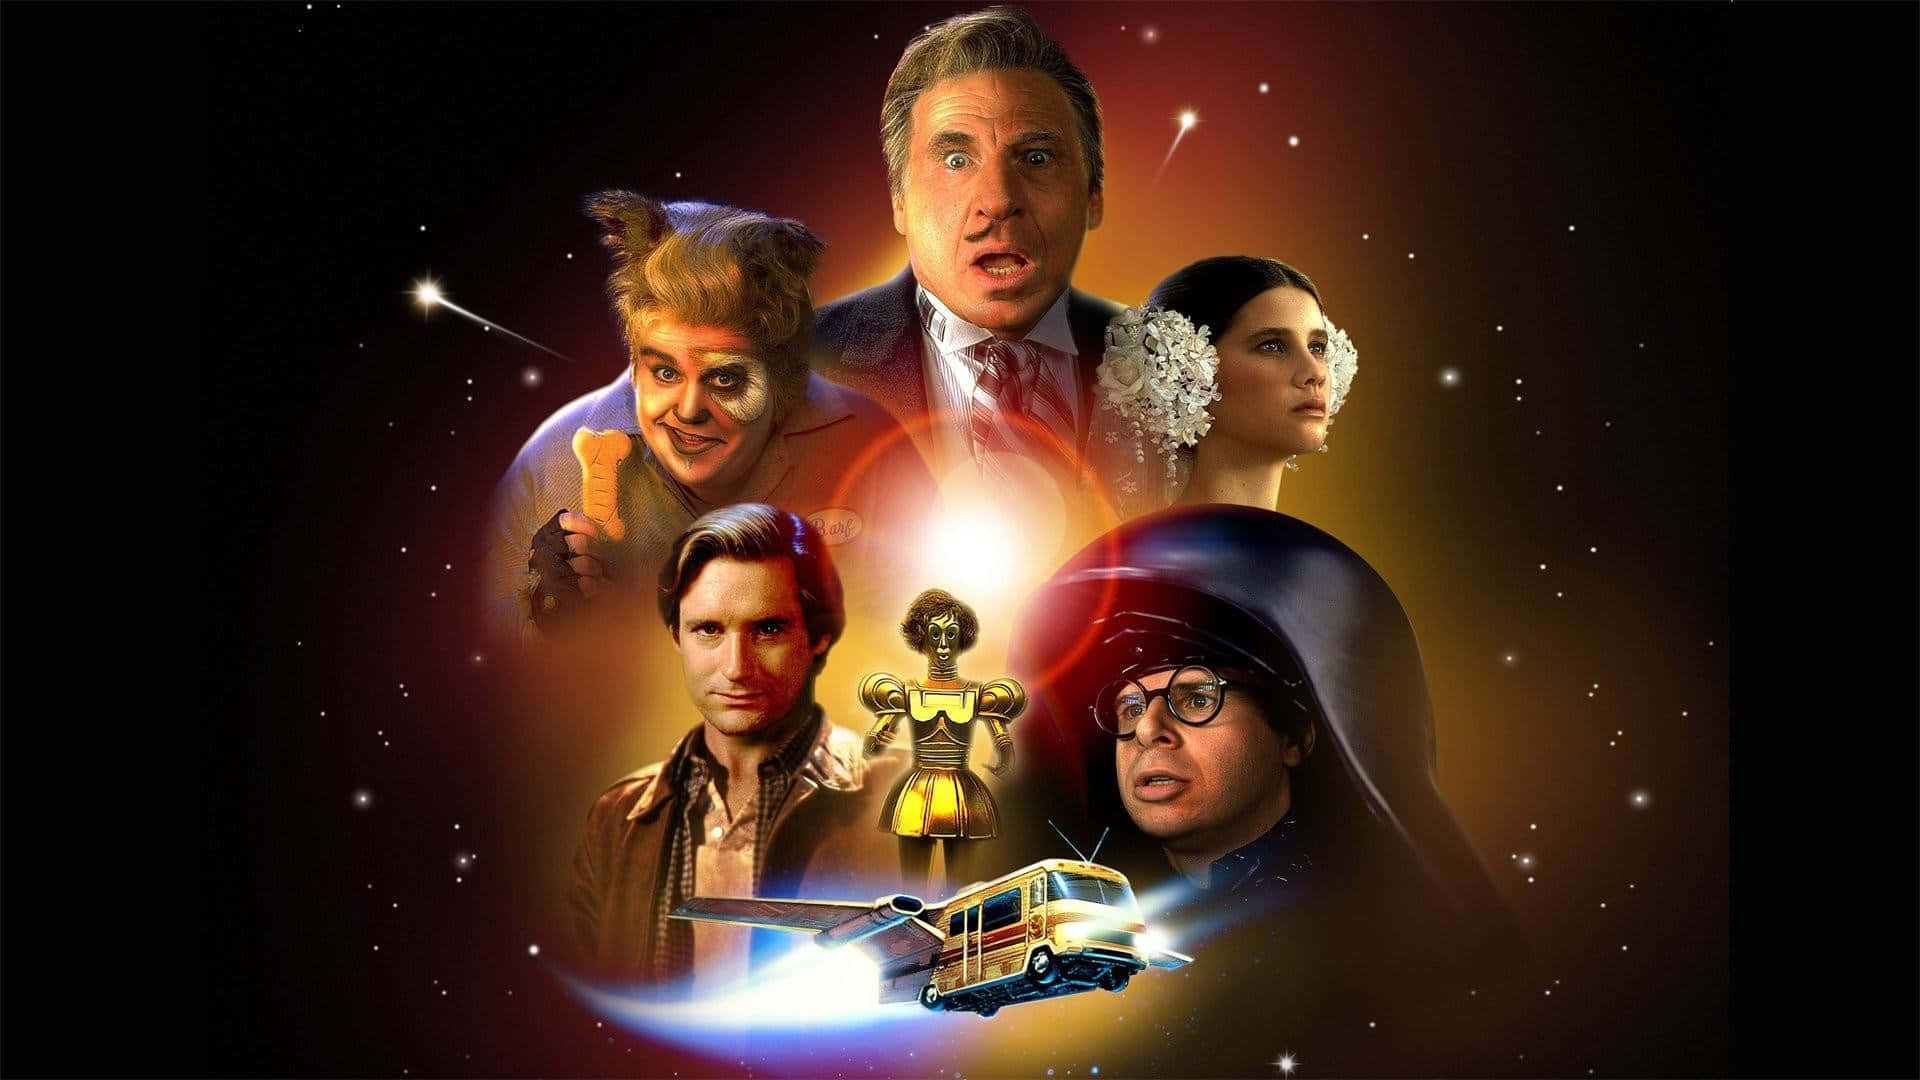 “The heroes of Spaceballs on their mission to save Princess Vespa” Wallpaper